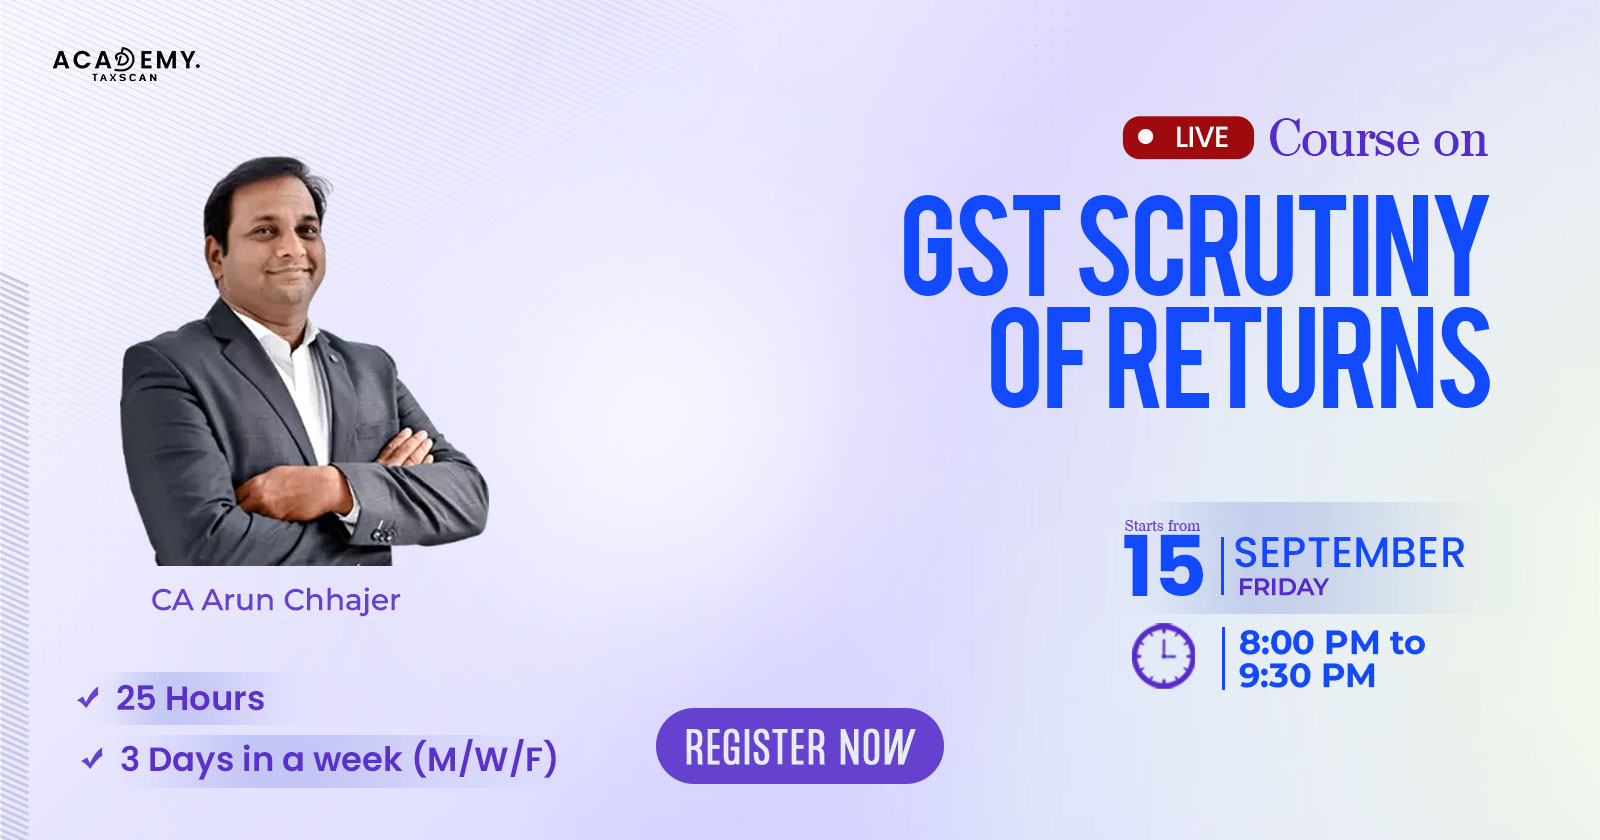 Live Course - GST Scrutiny of Returns - GST Scrutiny - Scrutiny - GST - Returns - online certificate course - Course 2023 - Course - certificate course 2023 - online certificate course 2023 - taxscan academy